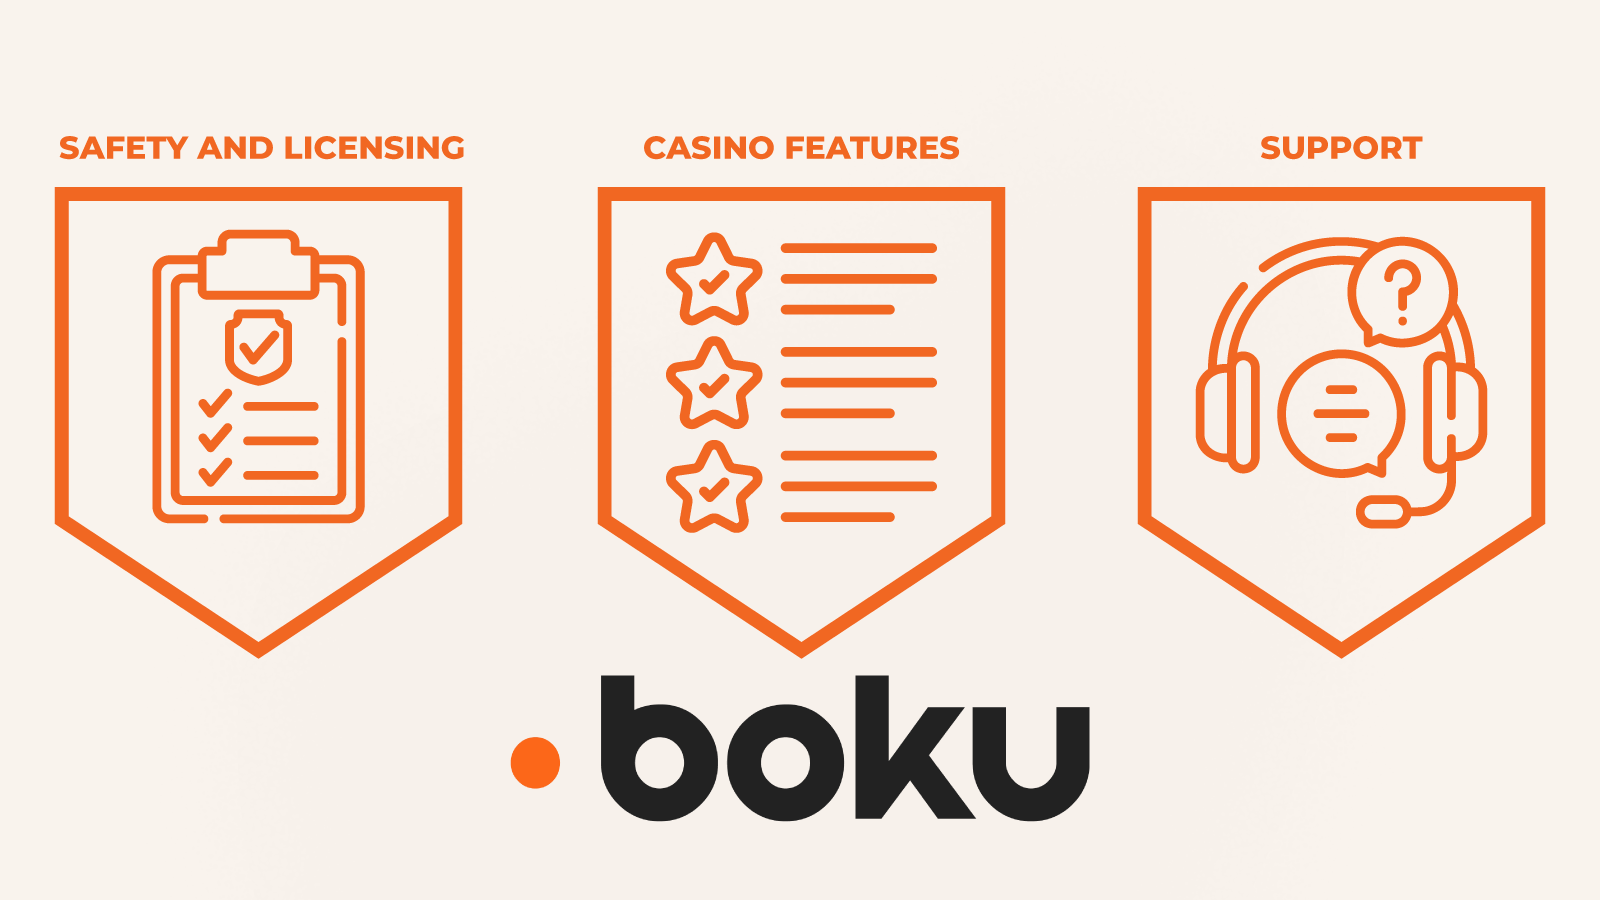 How to Compare New Casinos with Boku